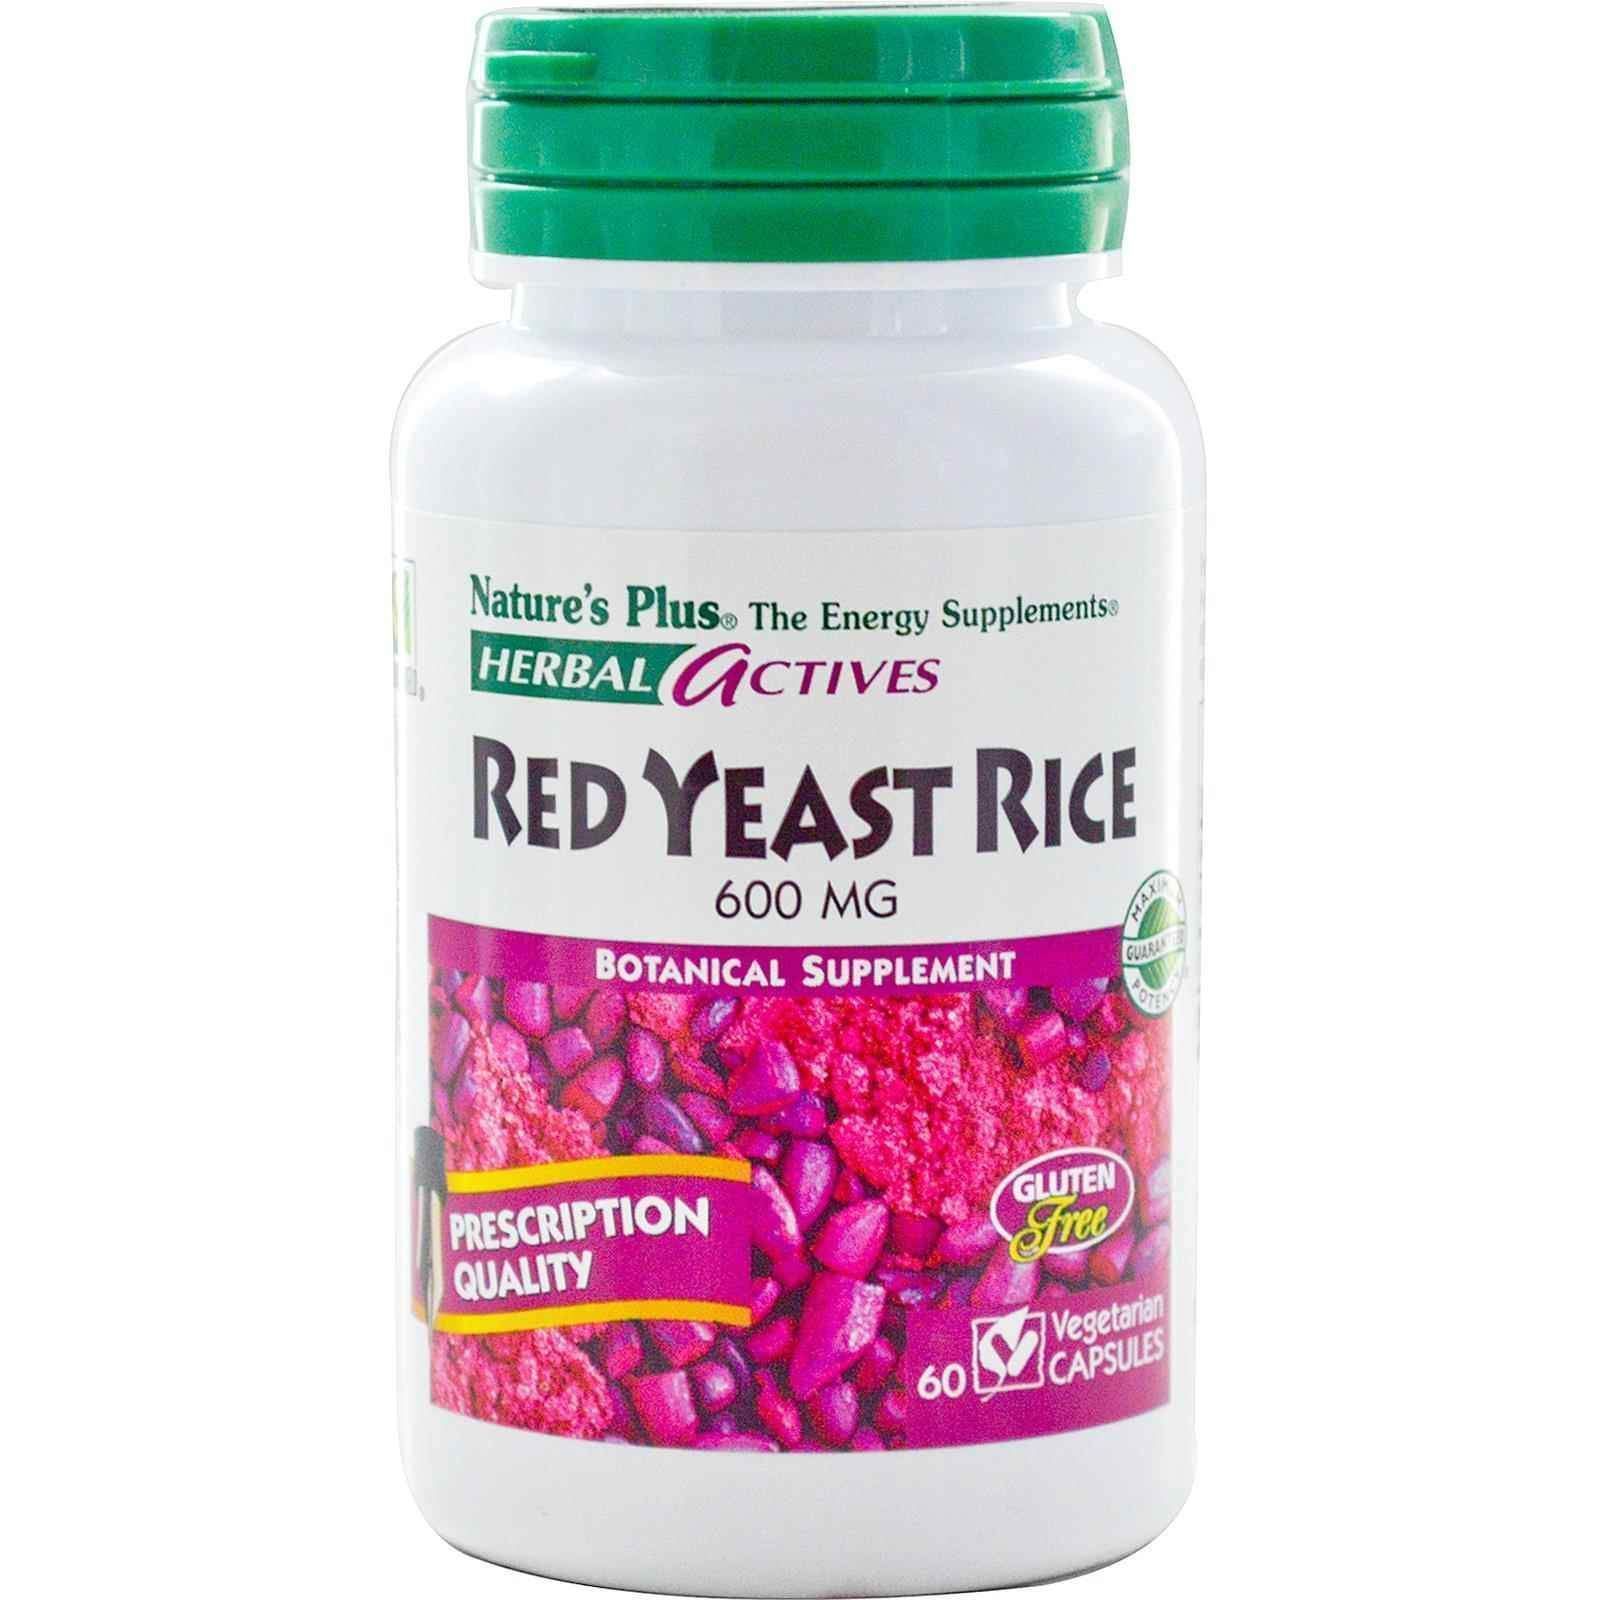 Nature's Plus Nature's Plus Red Yeast Rice 600 mg, 60 капс. 